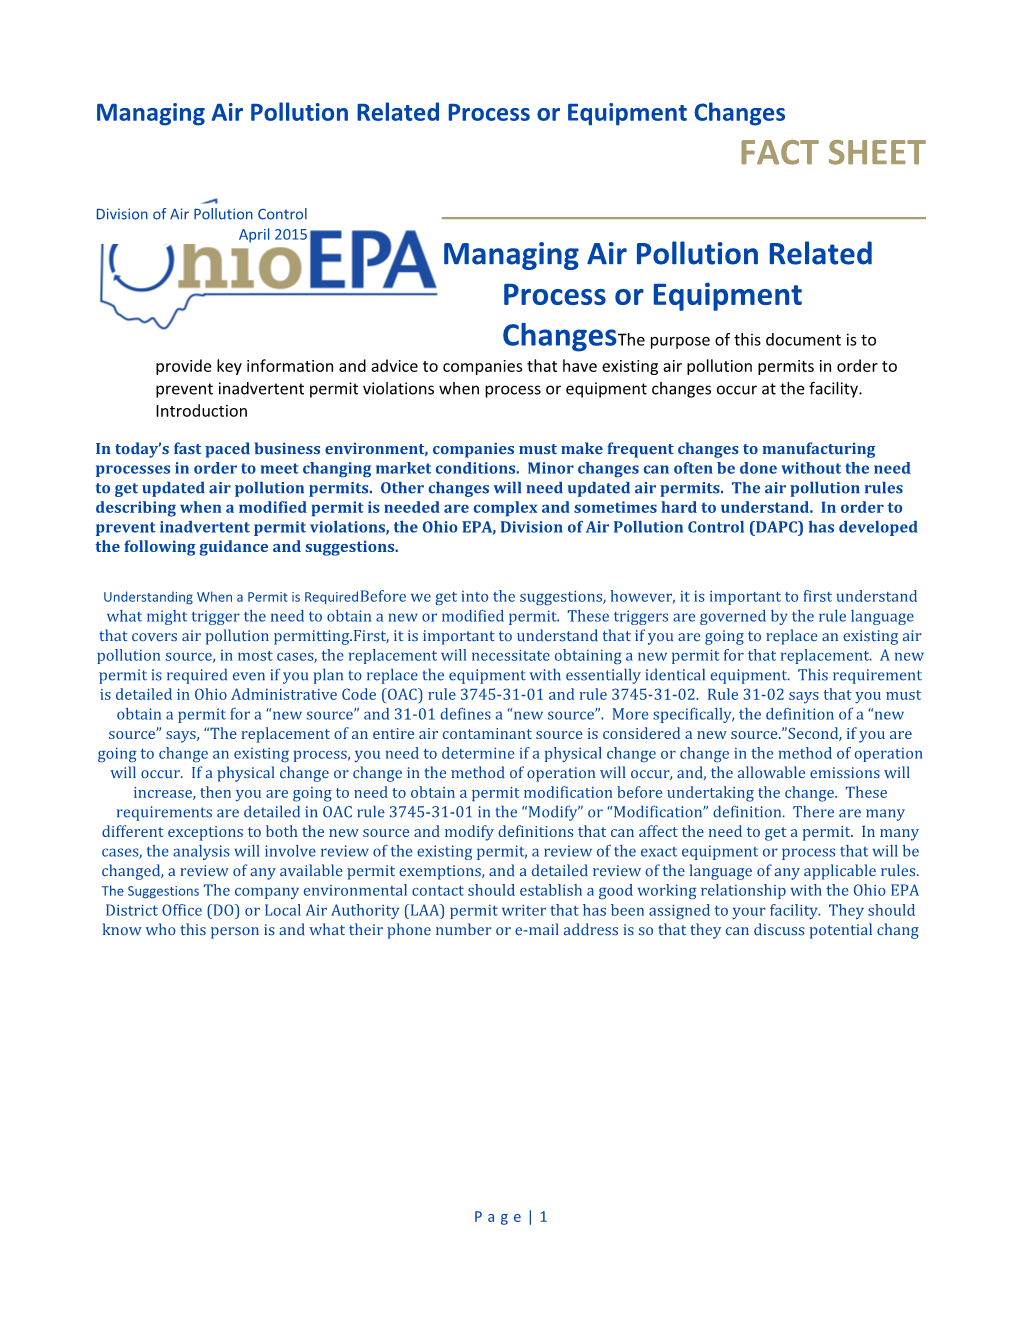 Managing Air Pollution Related Process Or Equipment Changes